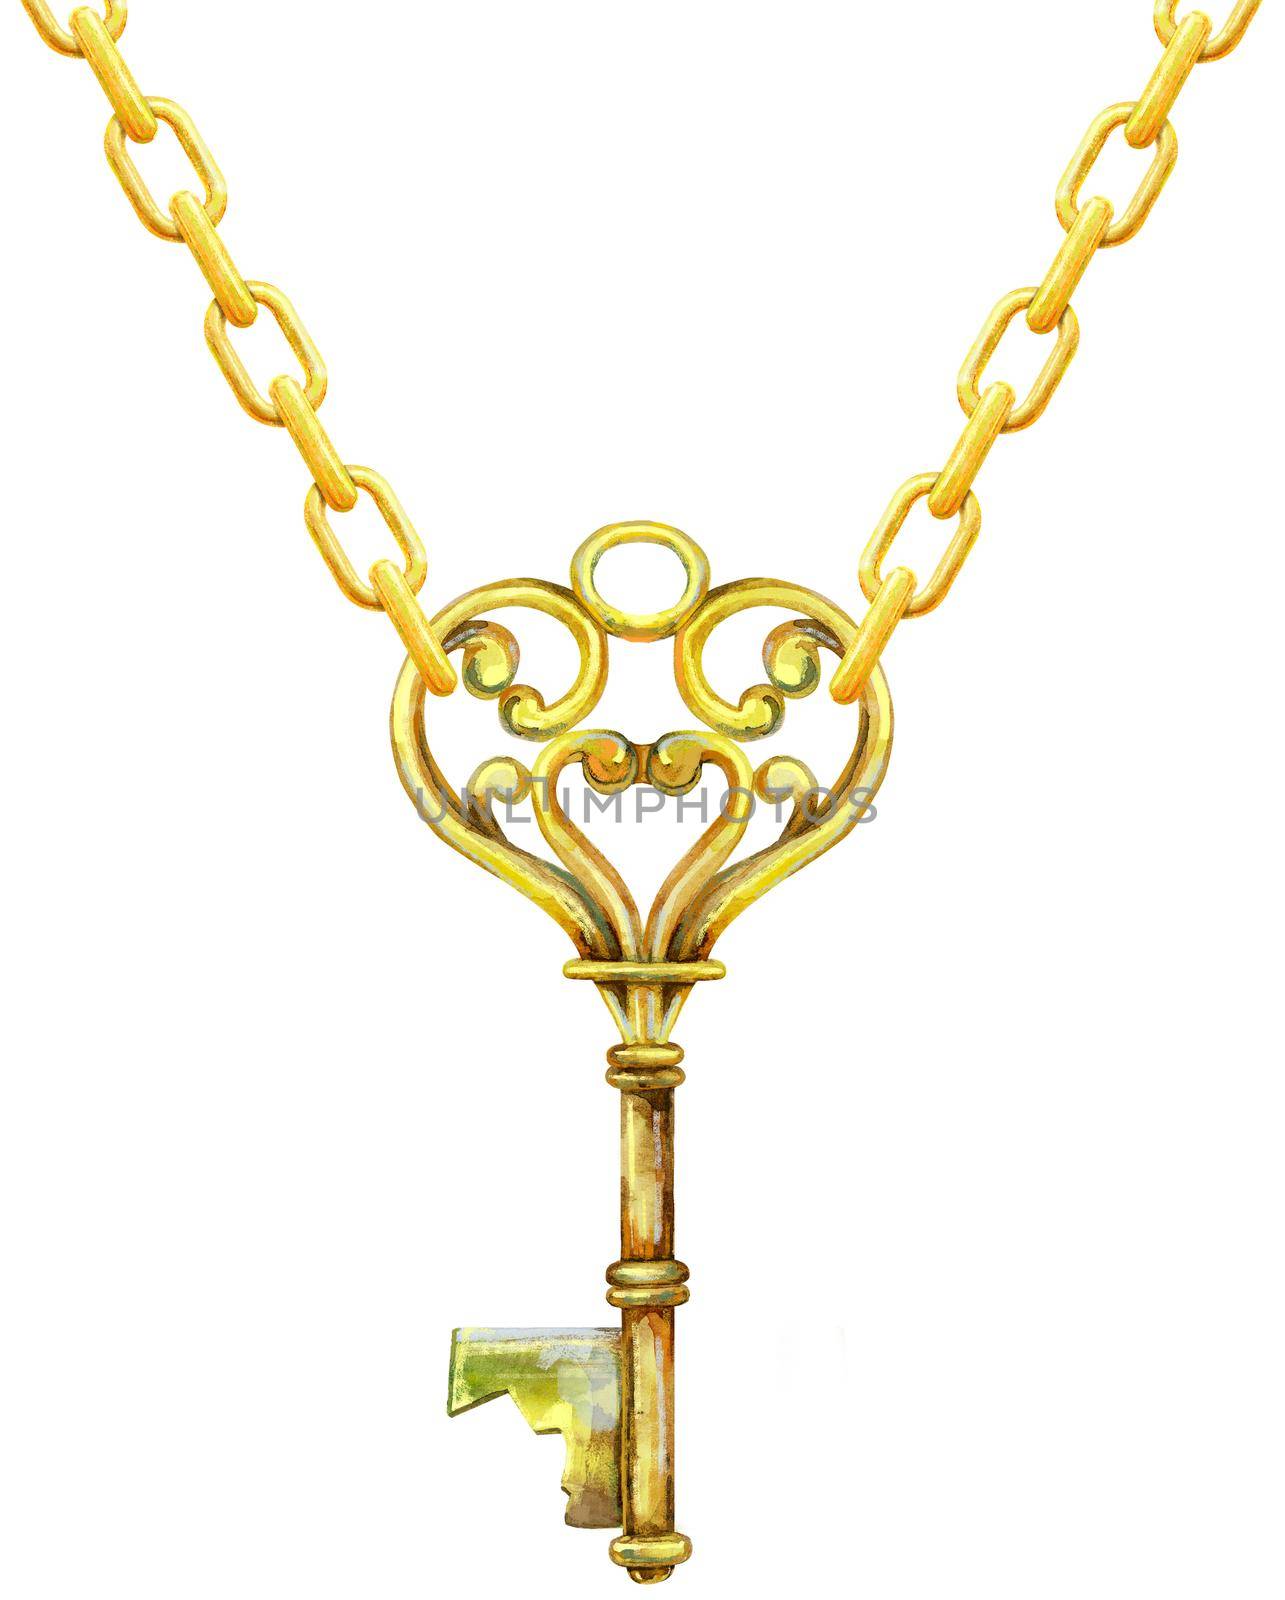 Watercolor vintage golden key on a chain isolated on white background by NataOmsk